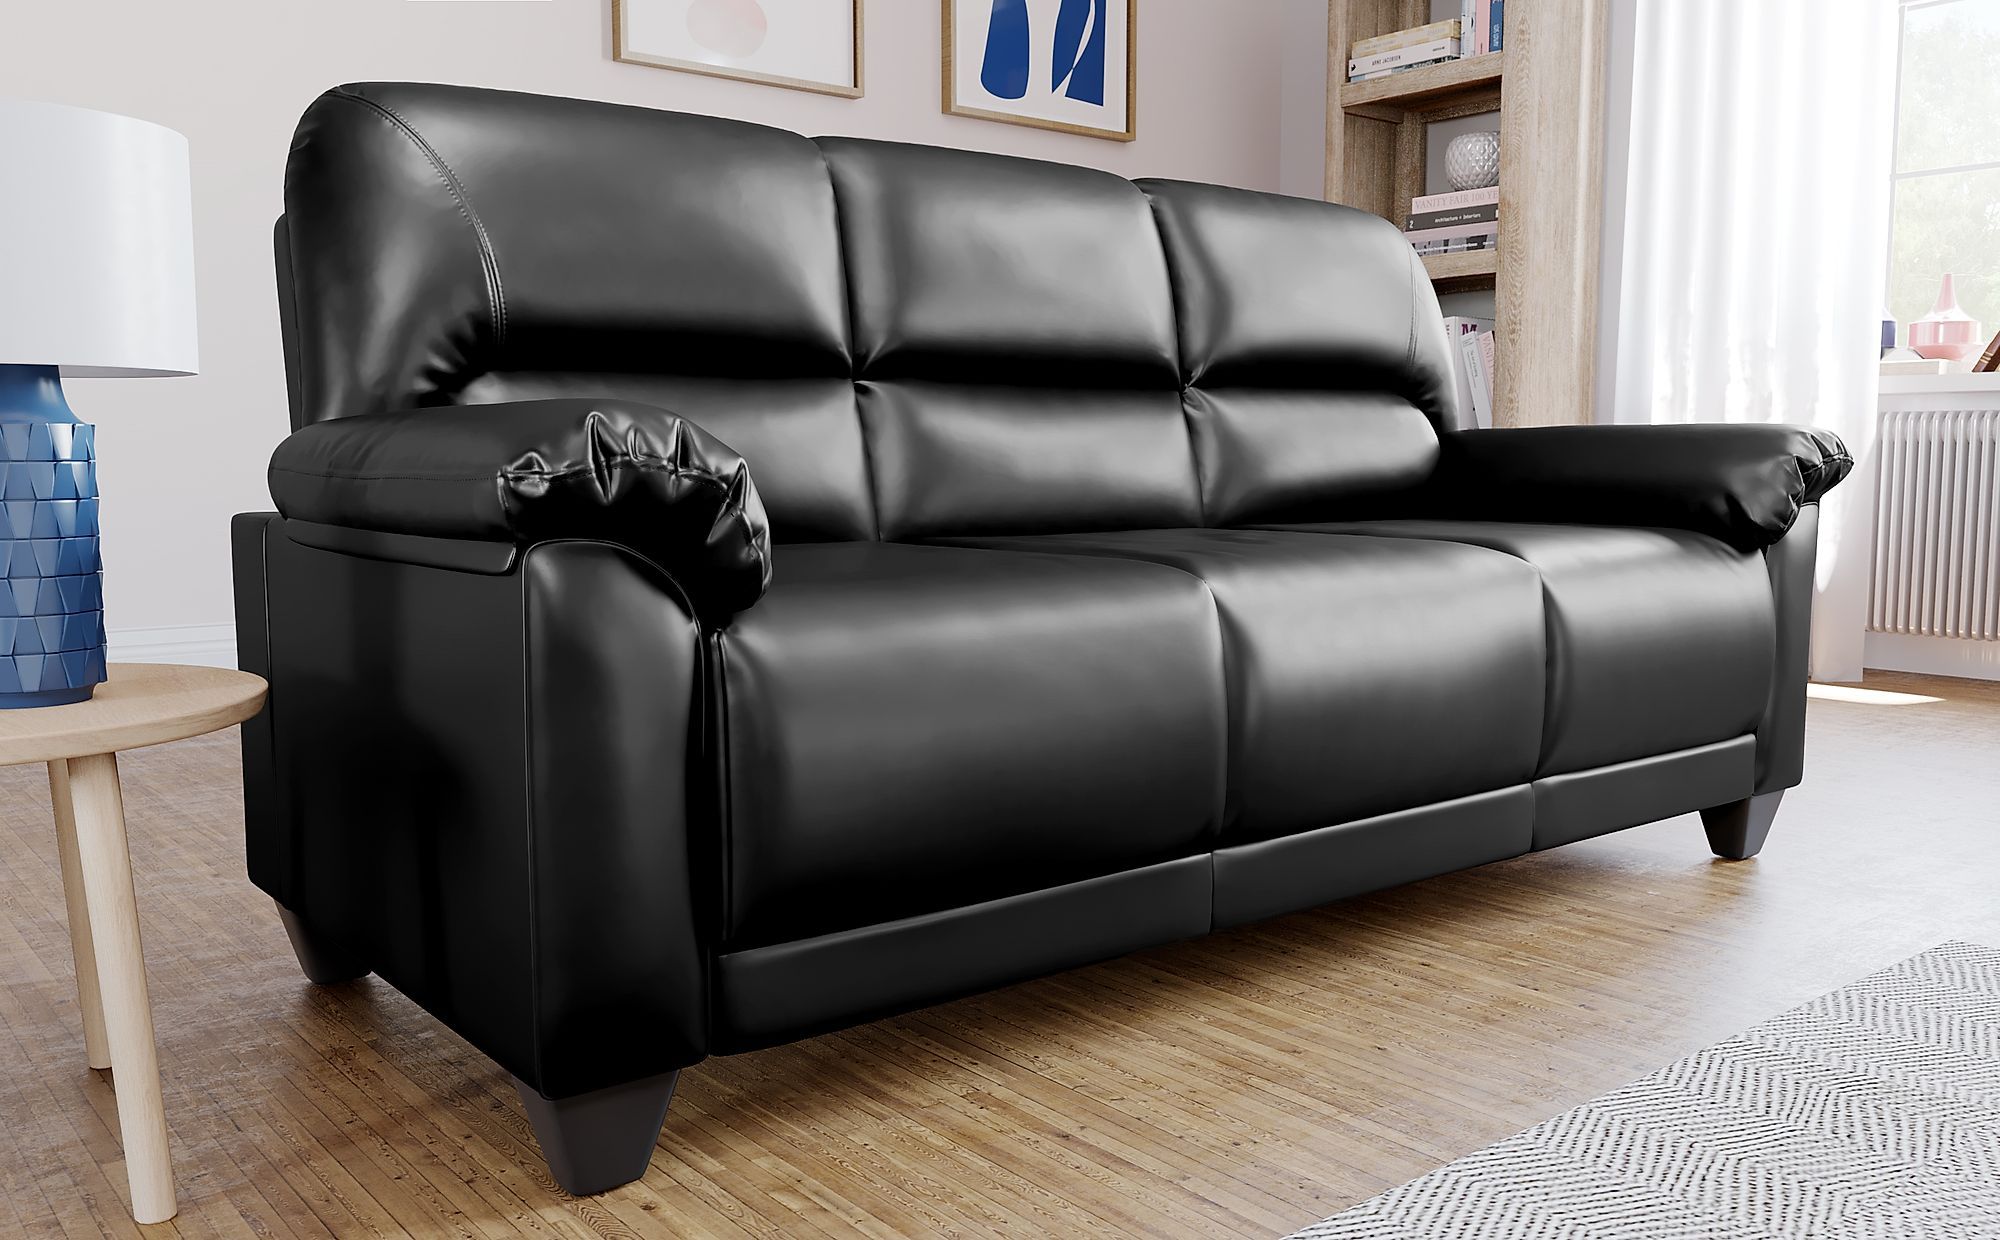 Kenton Small Black Leather 3 Seater Sofa | Furniture Choice Pertaining To 3 Seat L Shaped Sofas In Black (View 18 of 20)